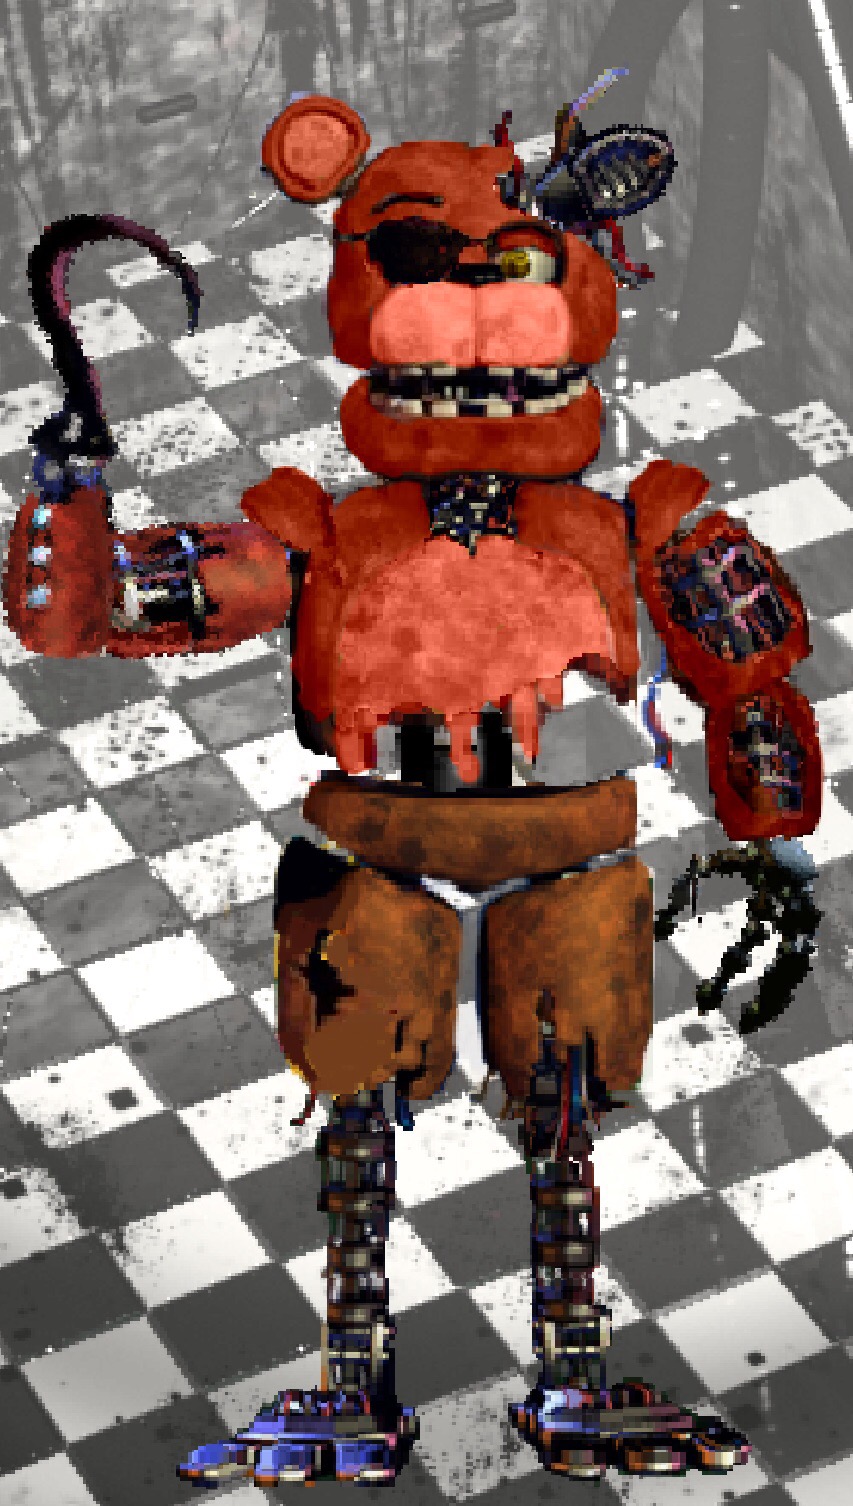 FNAF2: Withered Foxy by Thrakirzod on DeviantArt